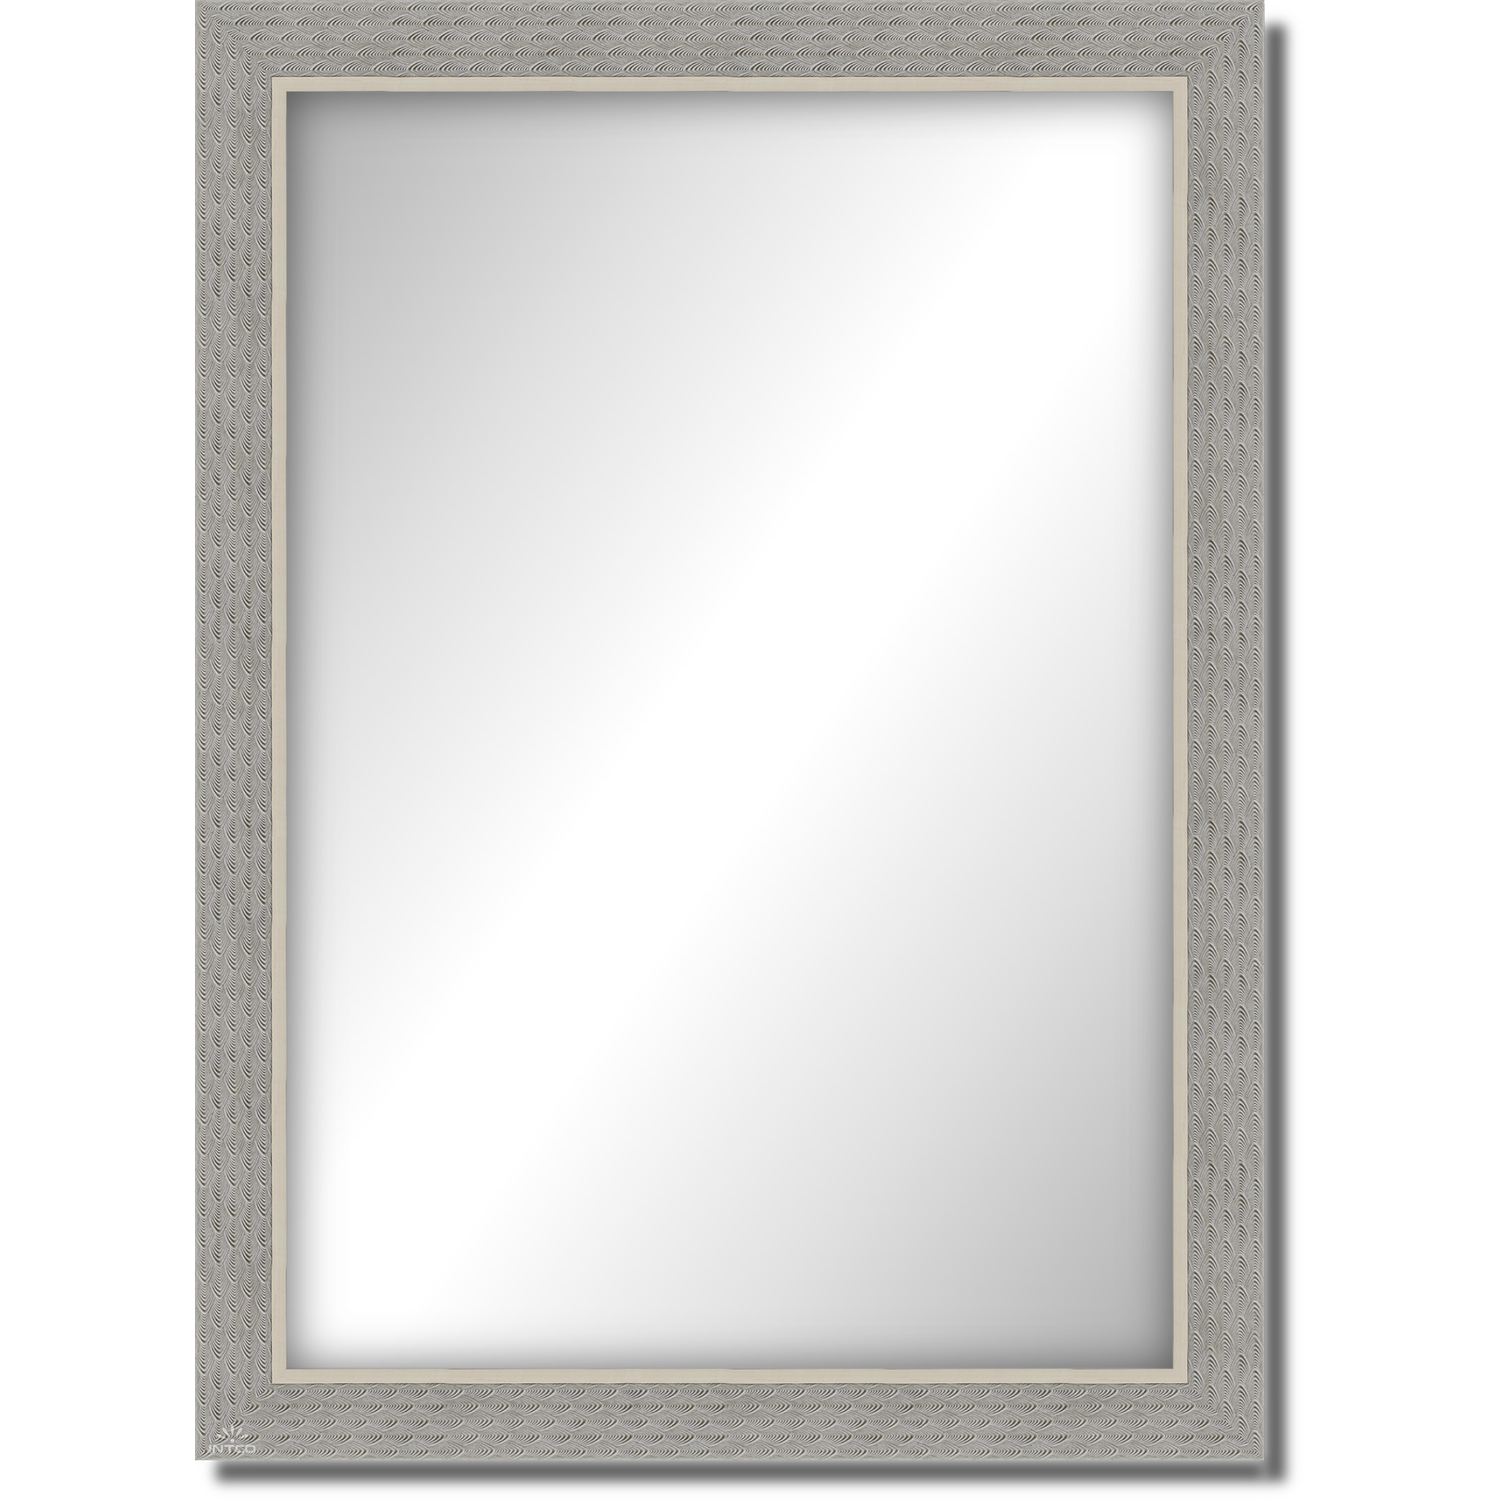 Talia Etched Effect Mirror - Grey Image 2